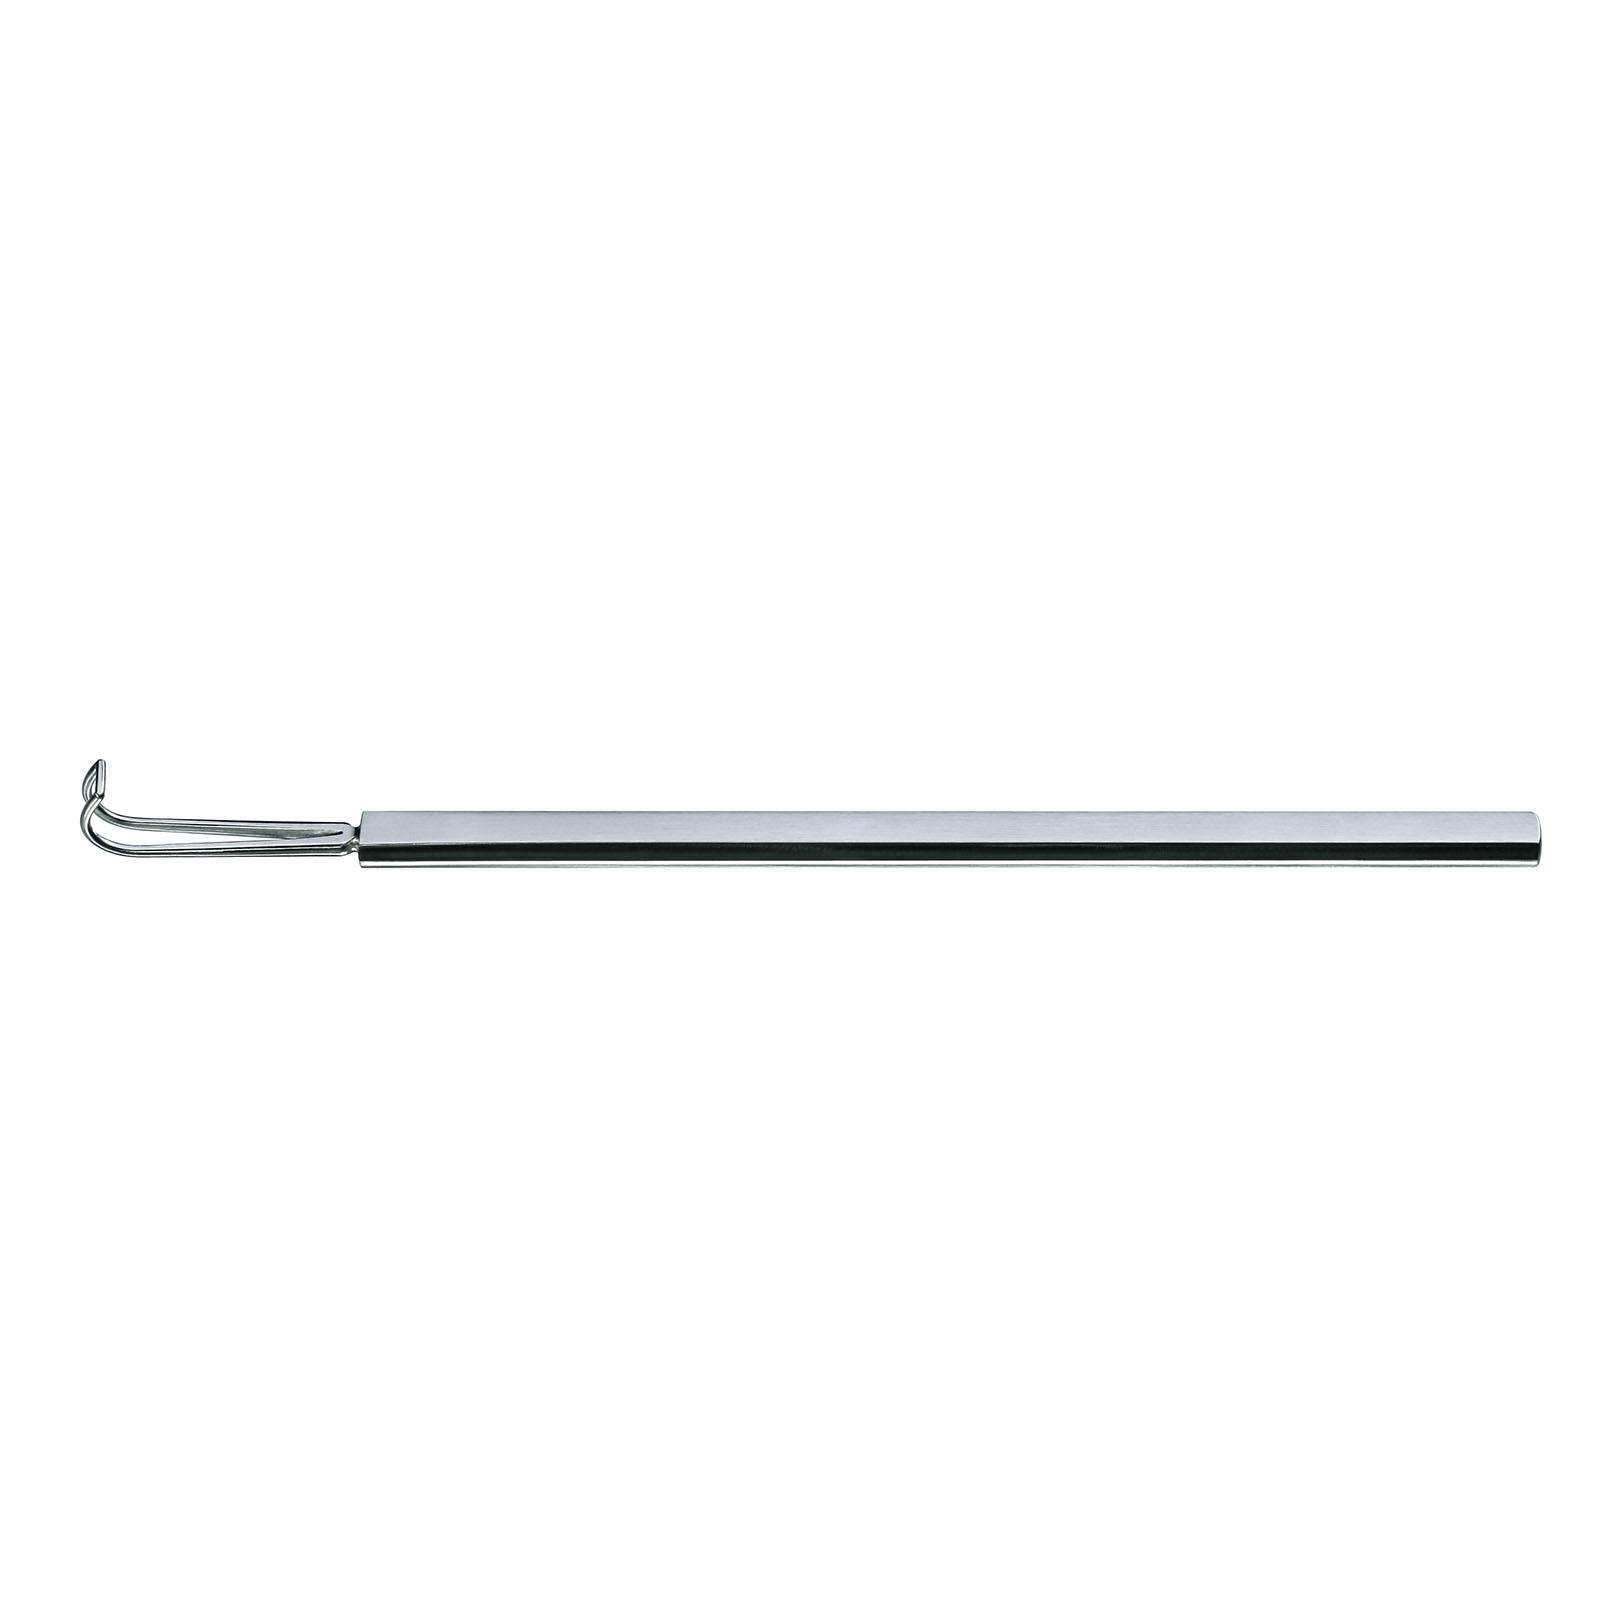 IF-8130 Stainless Steel Muscle Hook